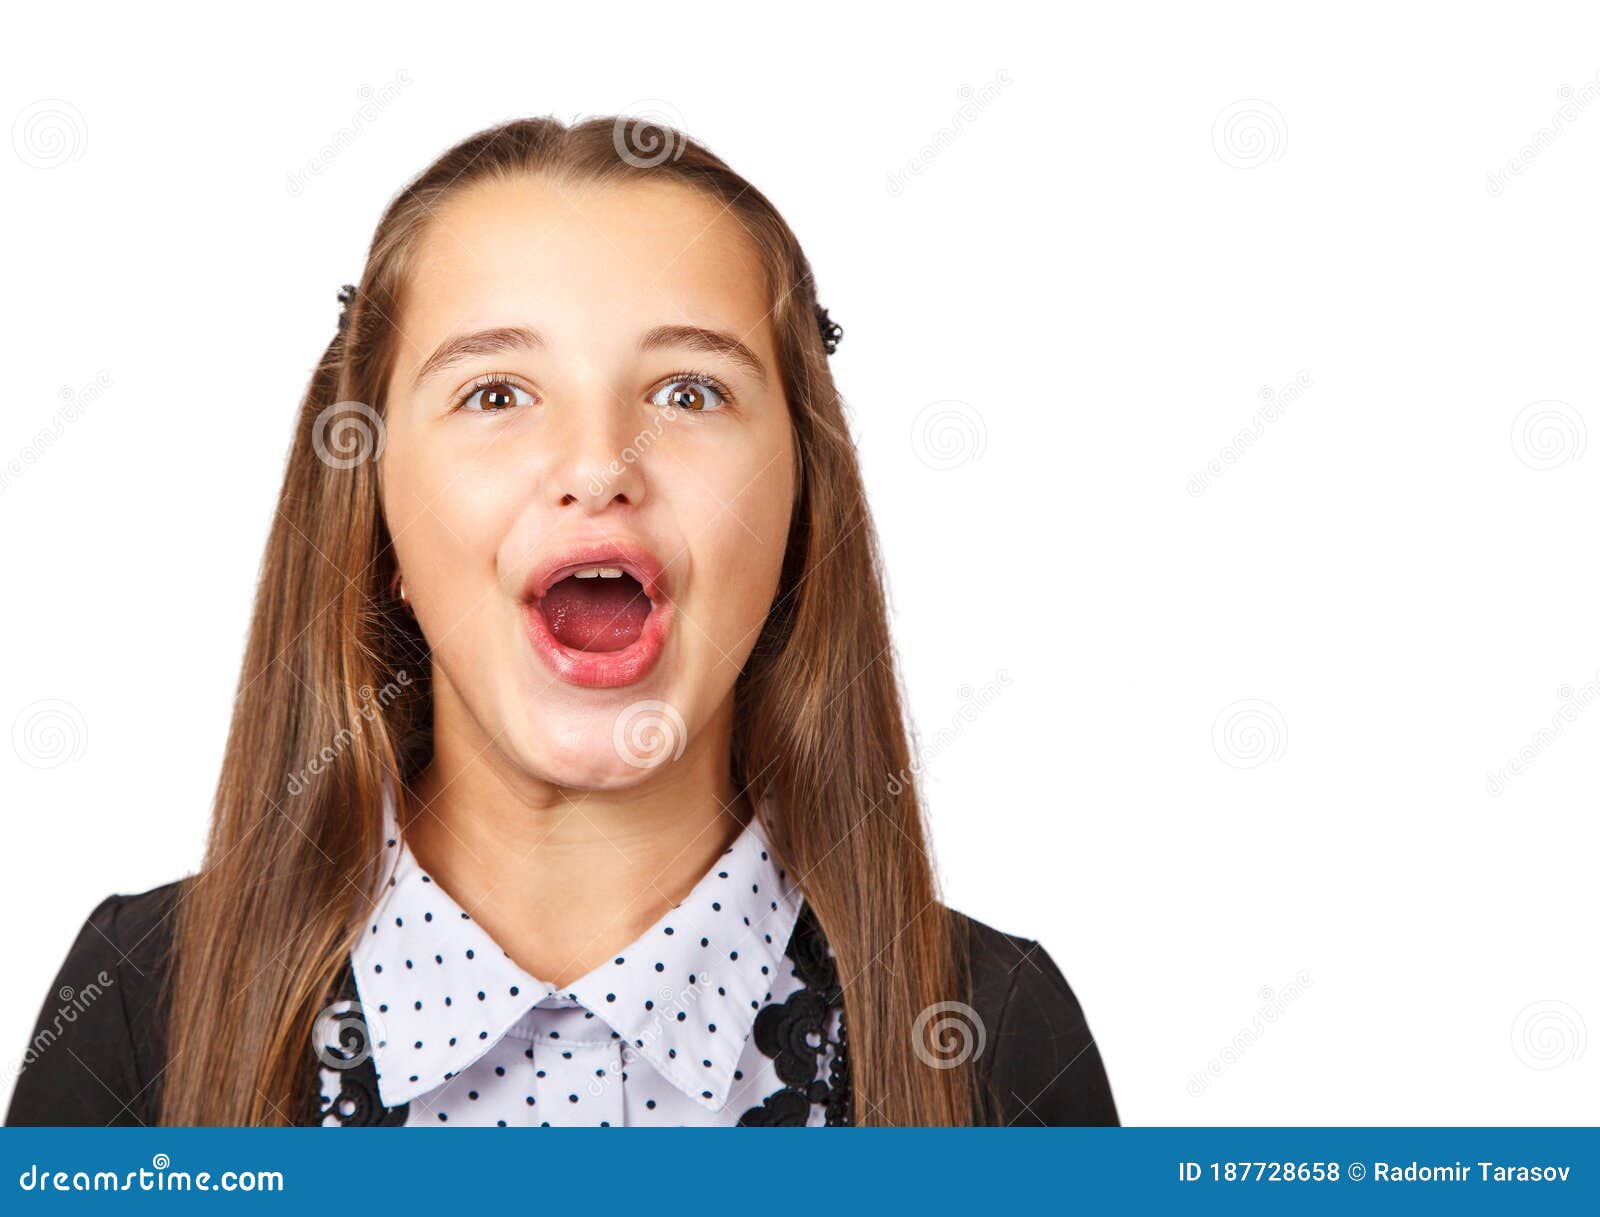 Teen Girl Making Funny Faces Fooling Around Stock Photo - Image of  expression, lovely: 187728658